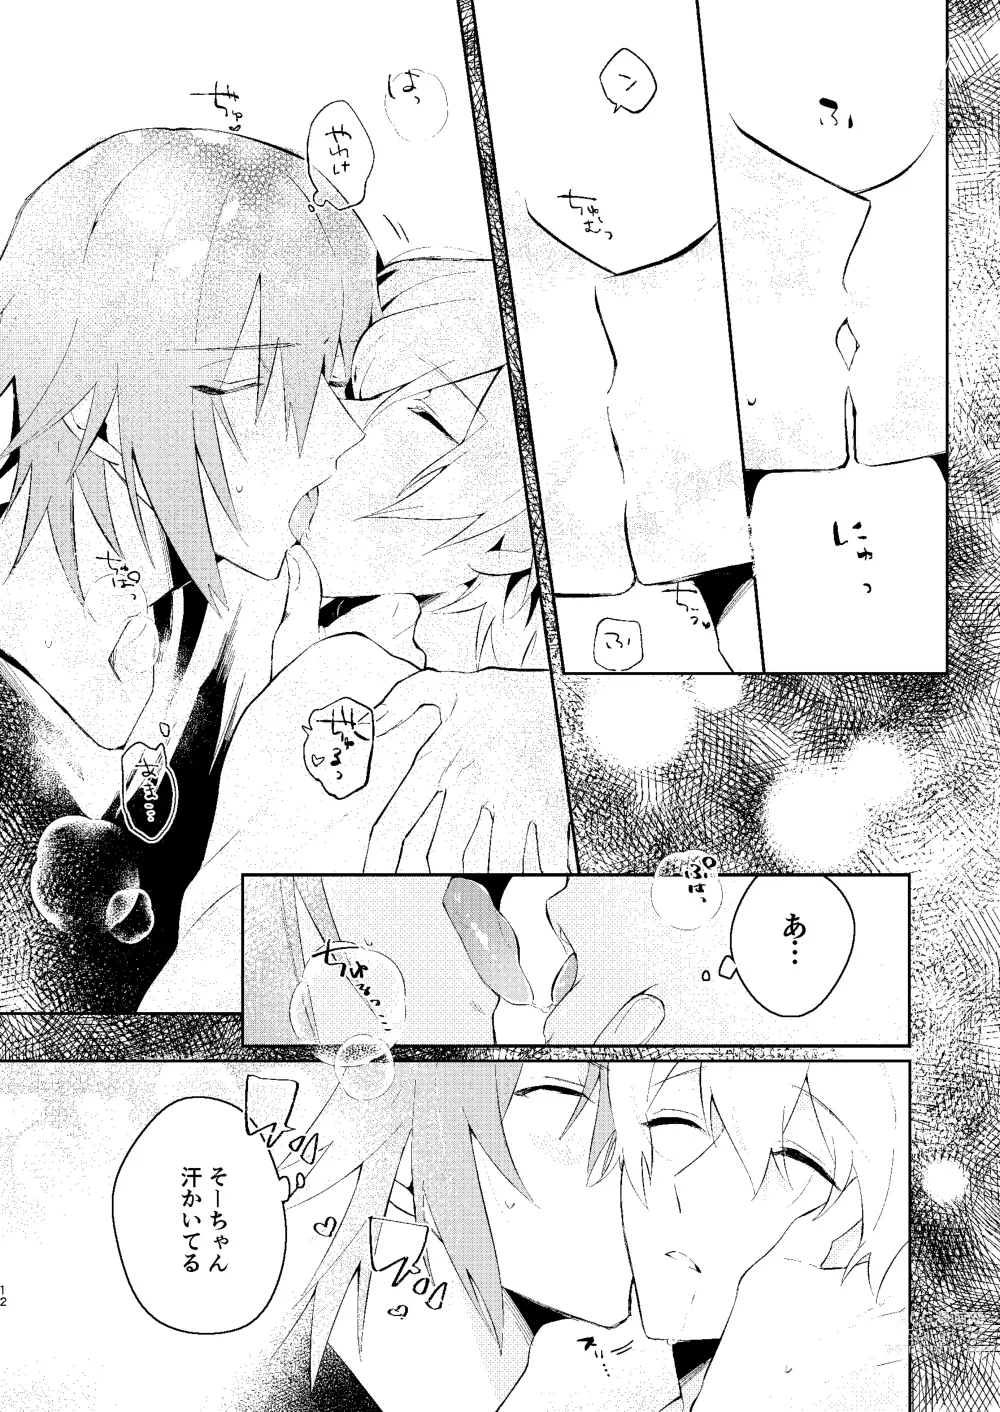 Page 11 of doujinshi Love you in a Dream